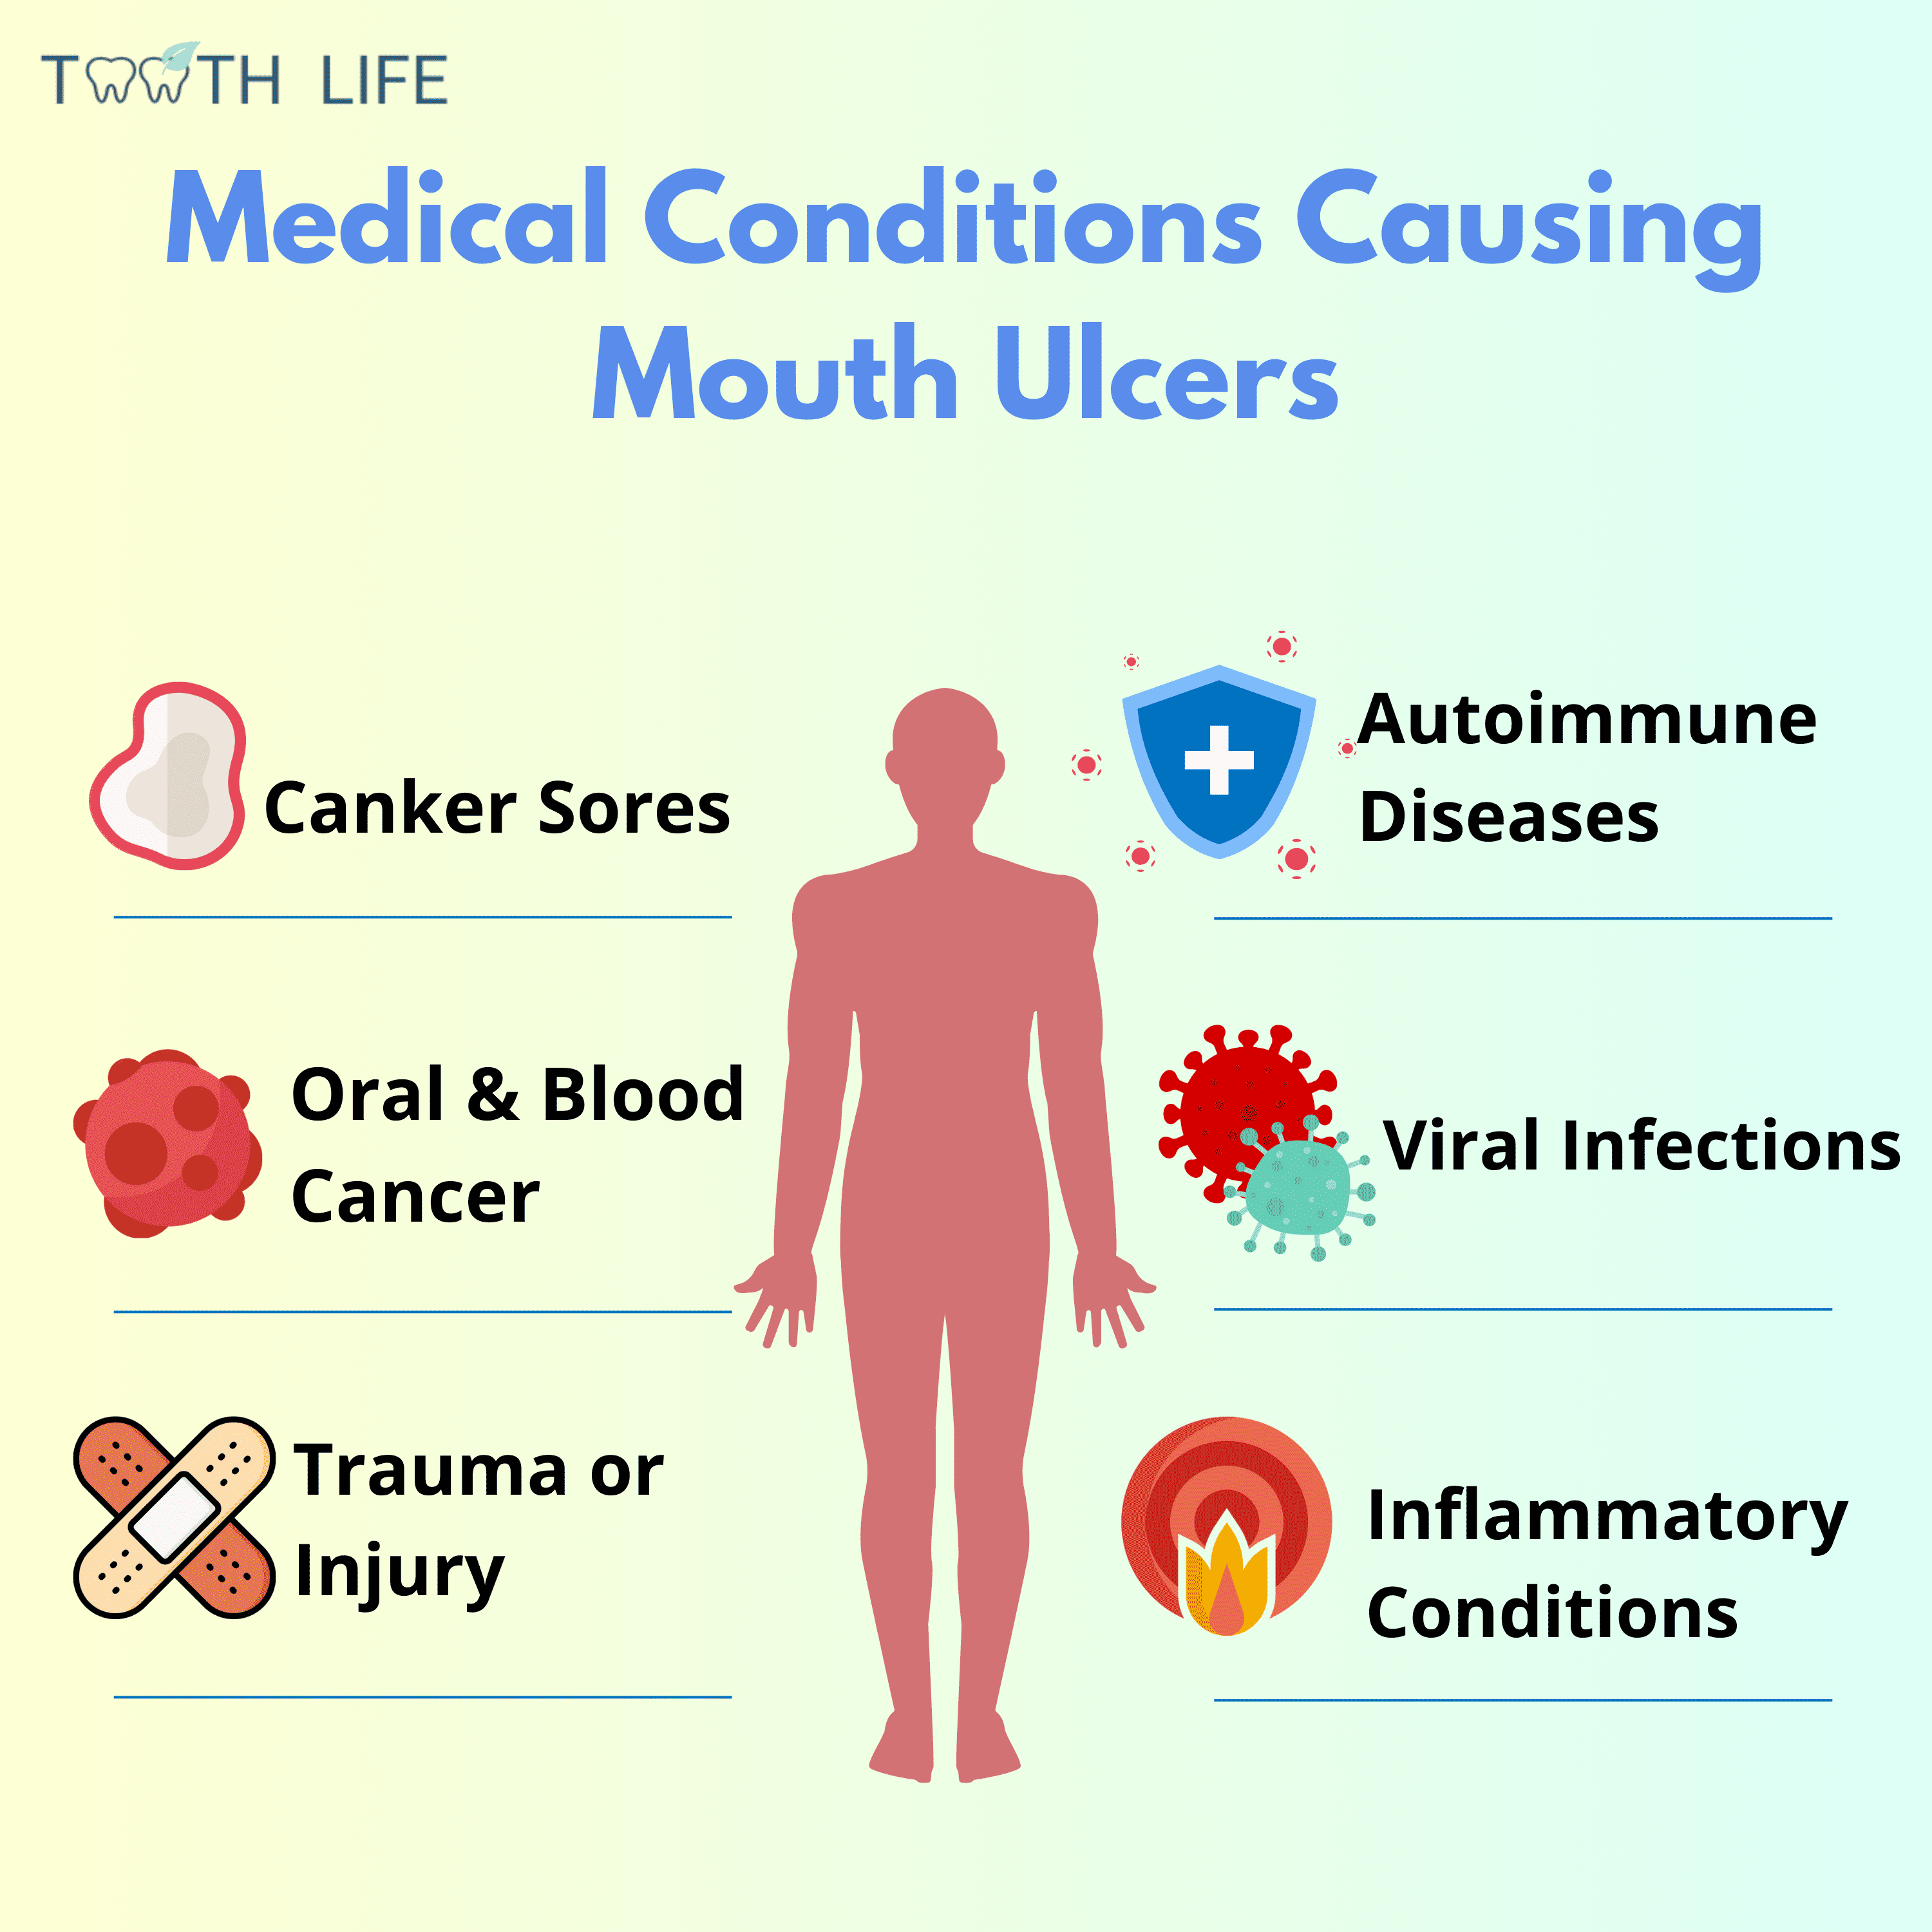 Conditions that can lead to mouth ulcers